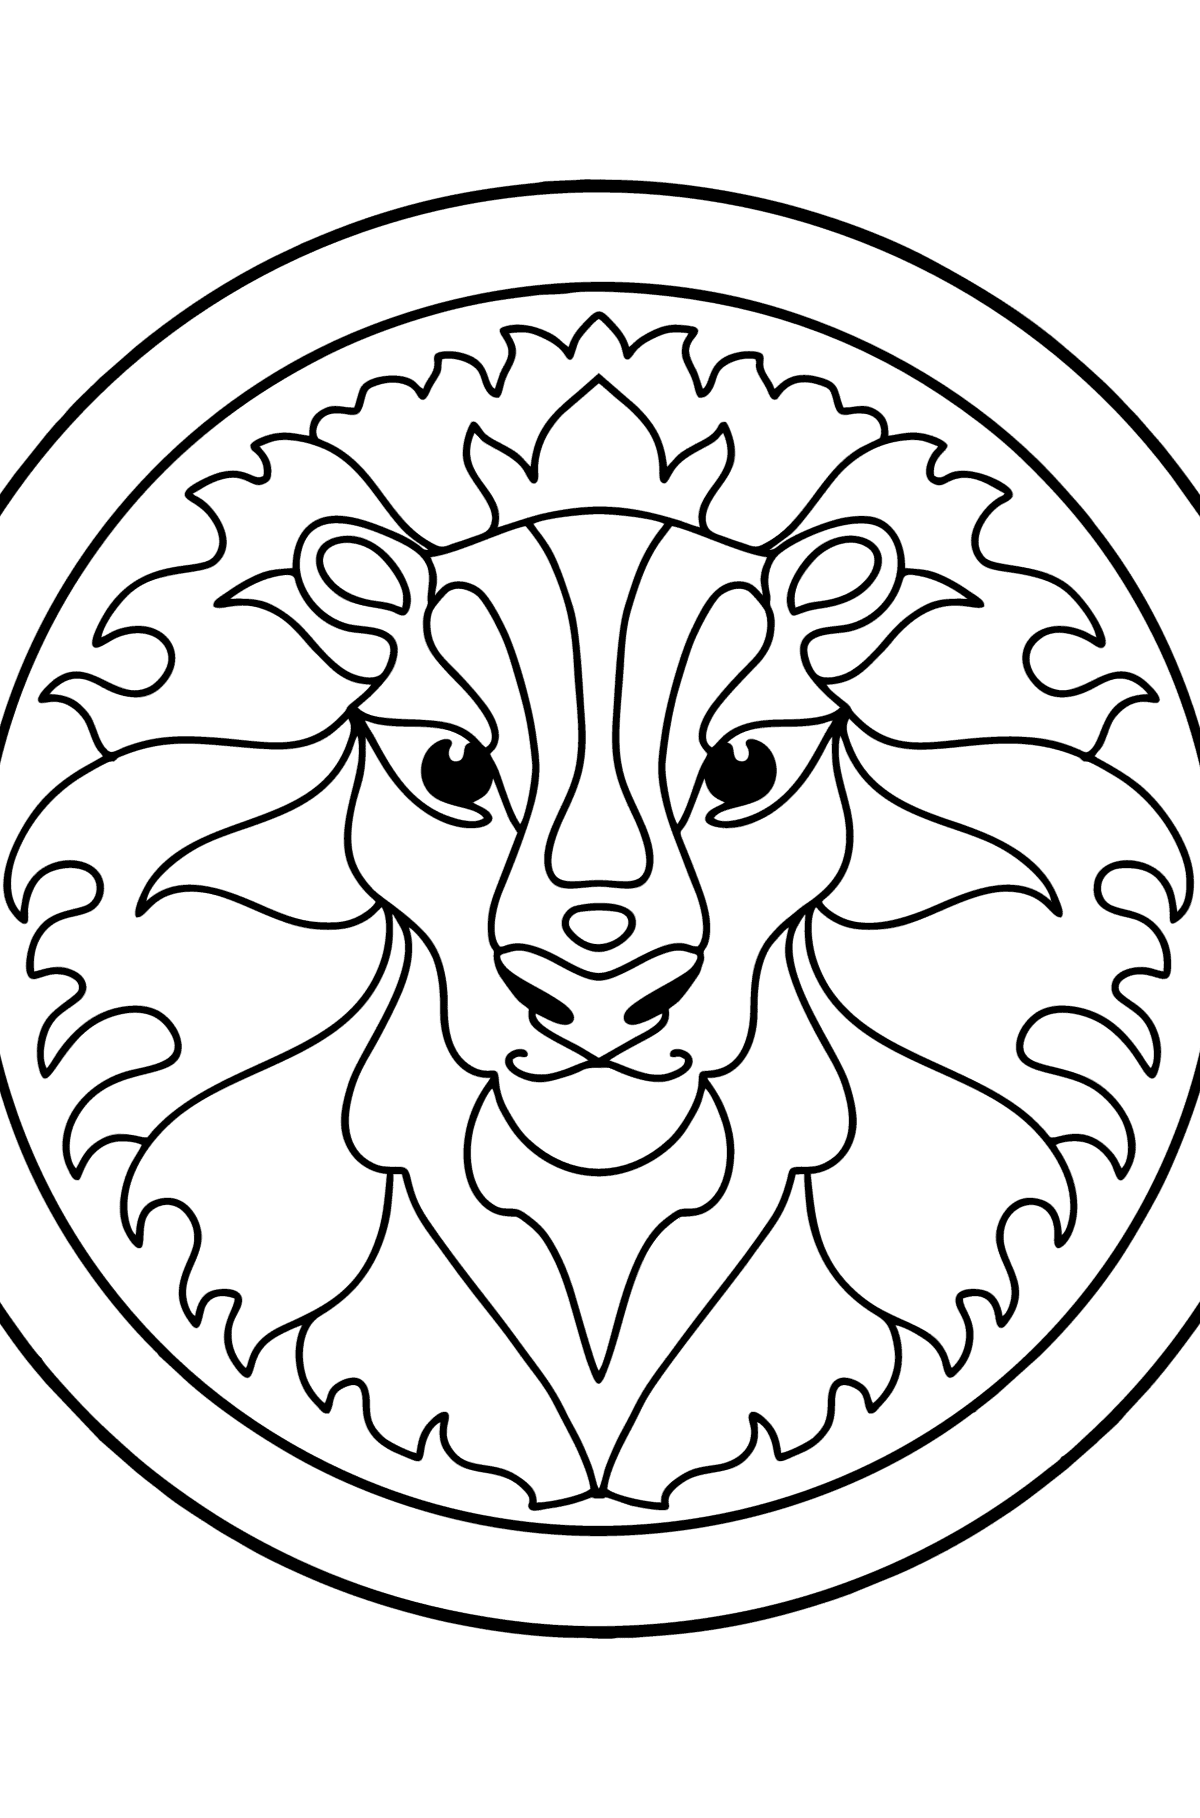 Coloring page for kids - zodiac sign Leo - Coloring Pages for Kids